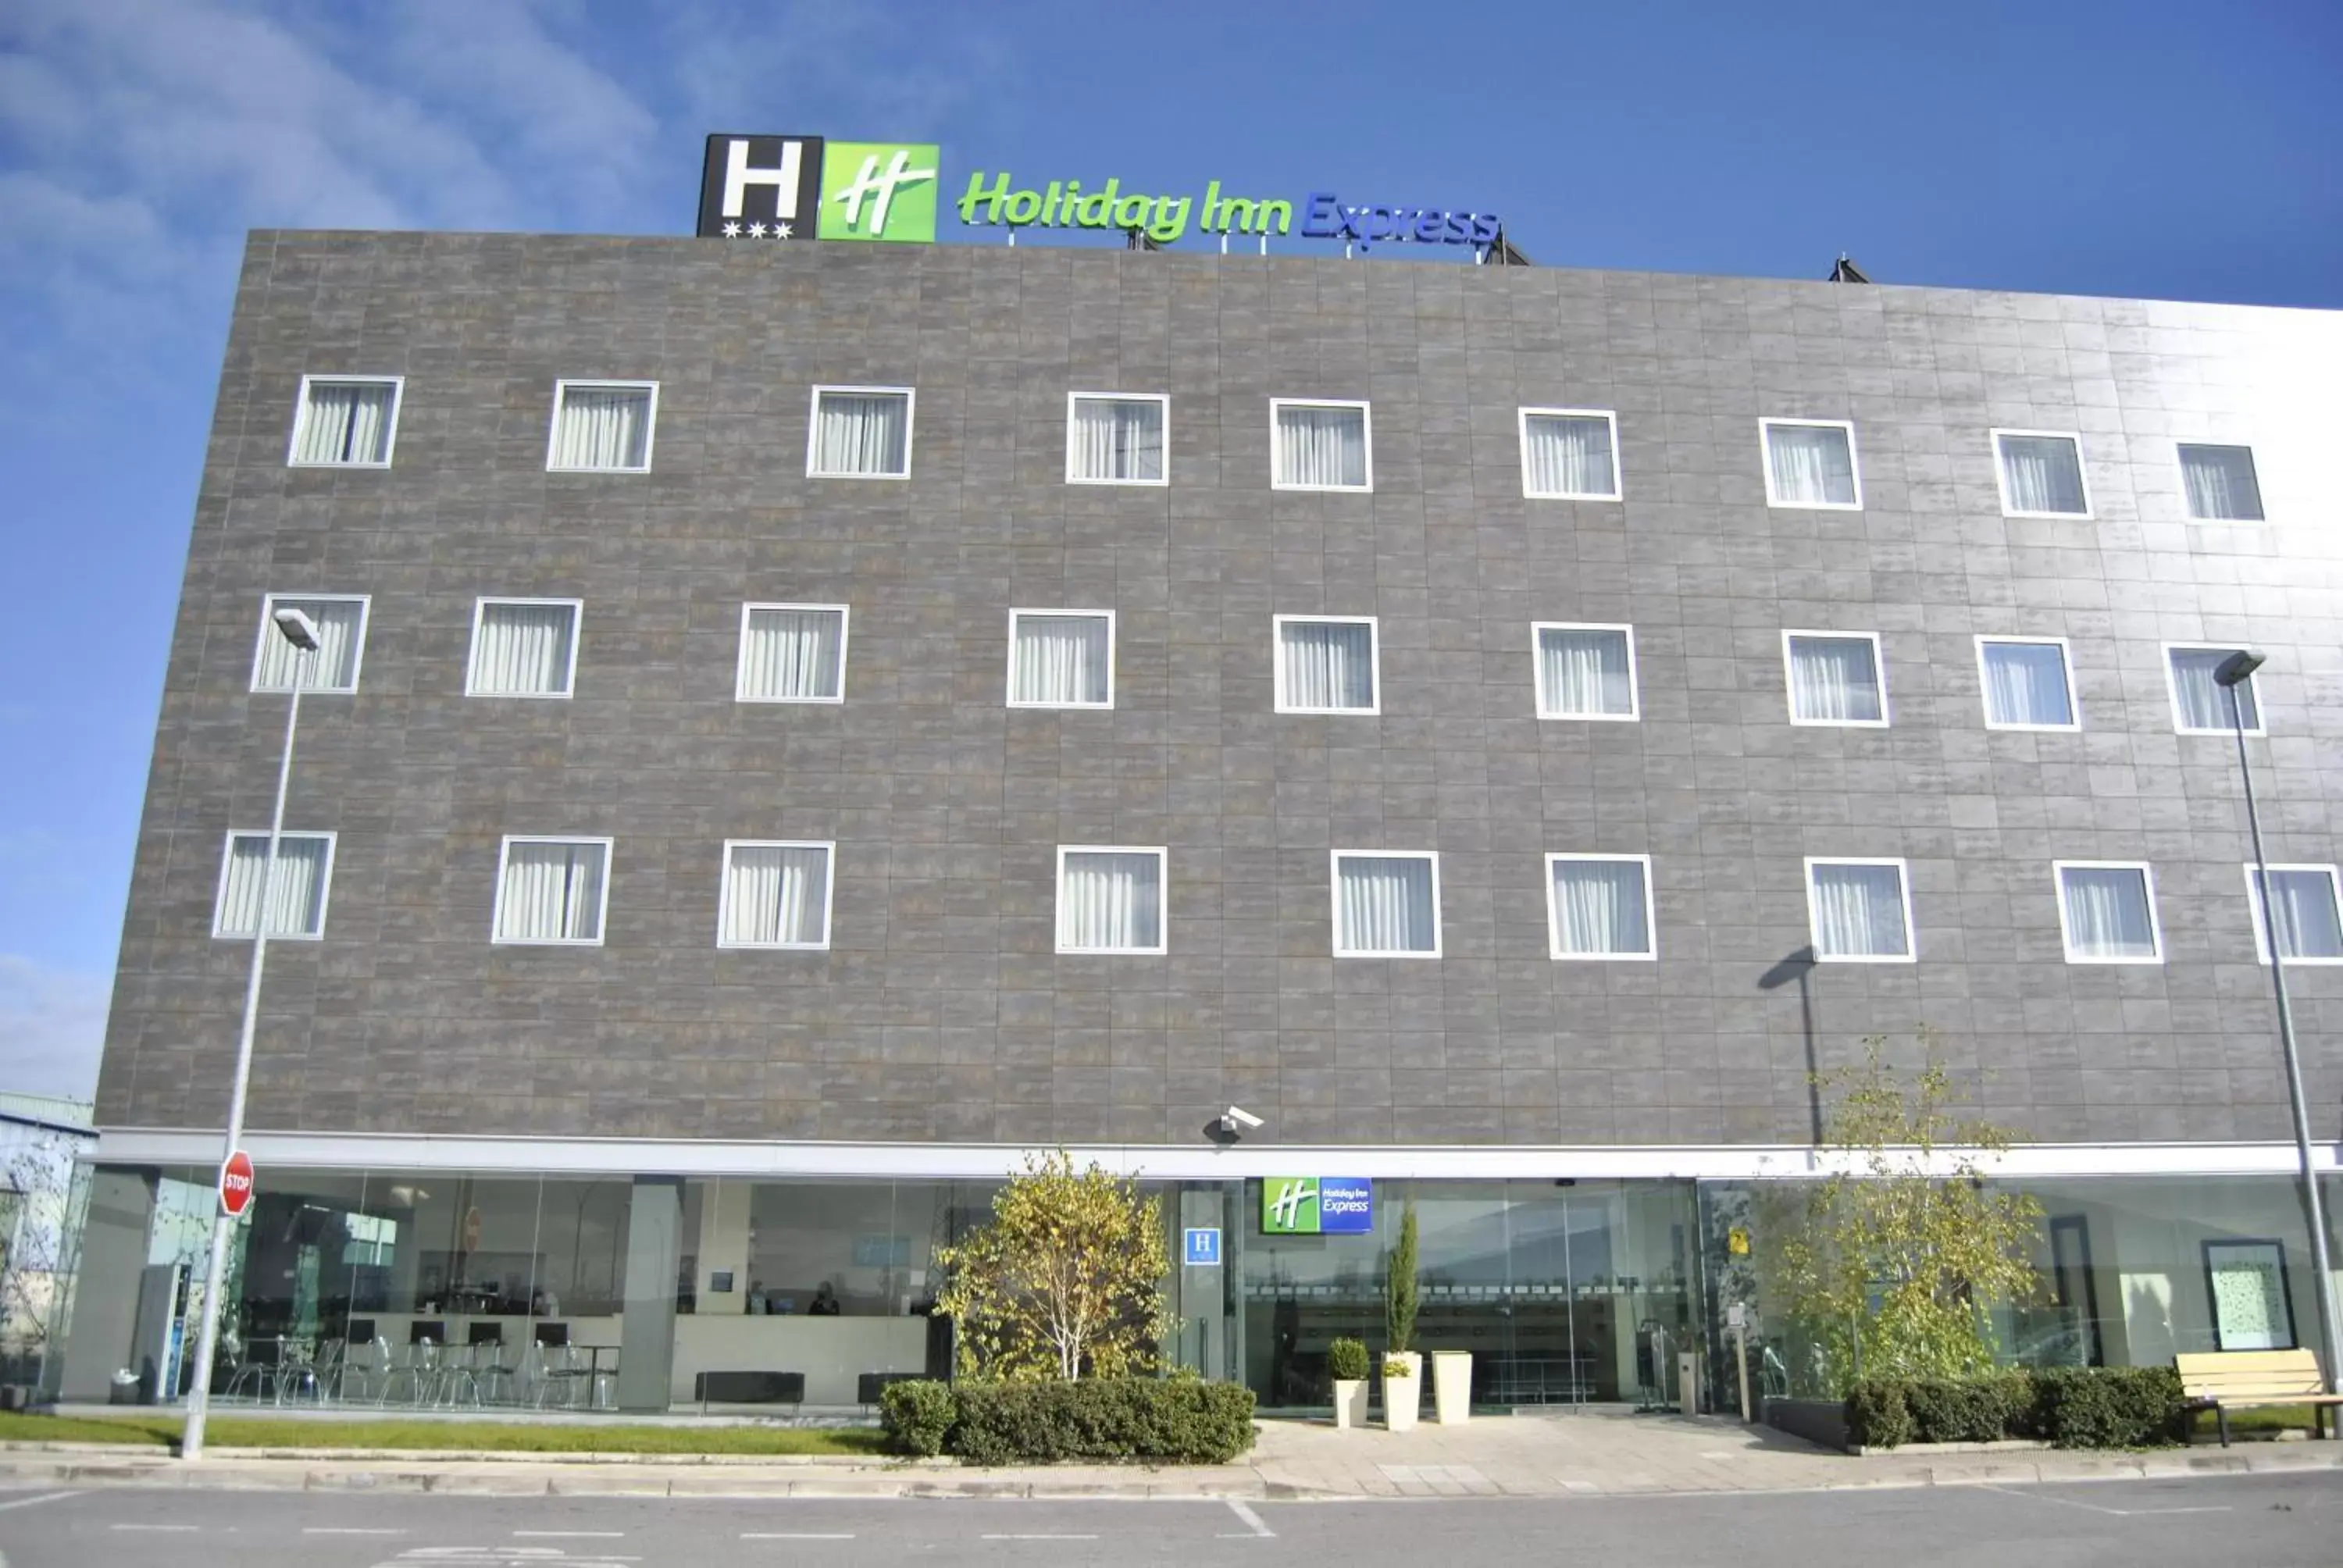 Facade/entrance, Property Building in Holiday Inn Express Pamplona, an IHG Hotel